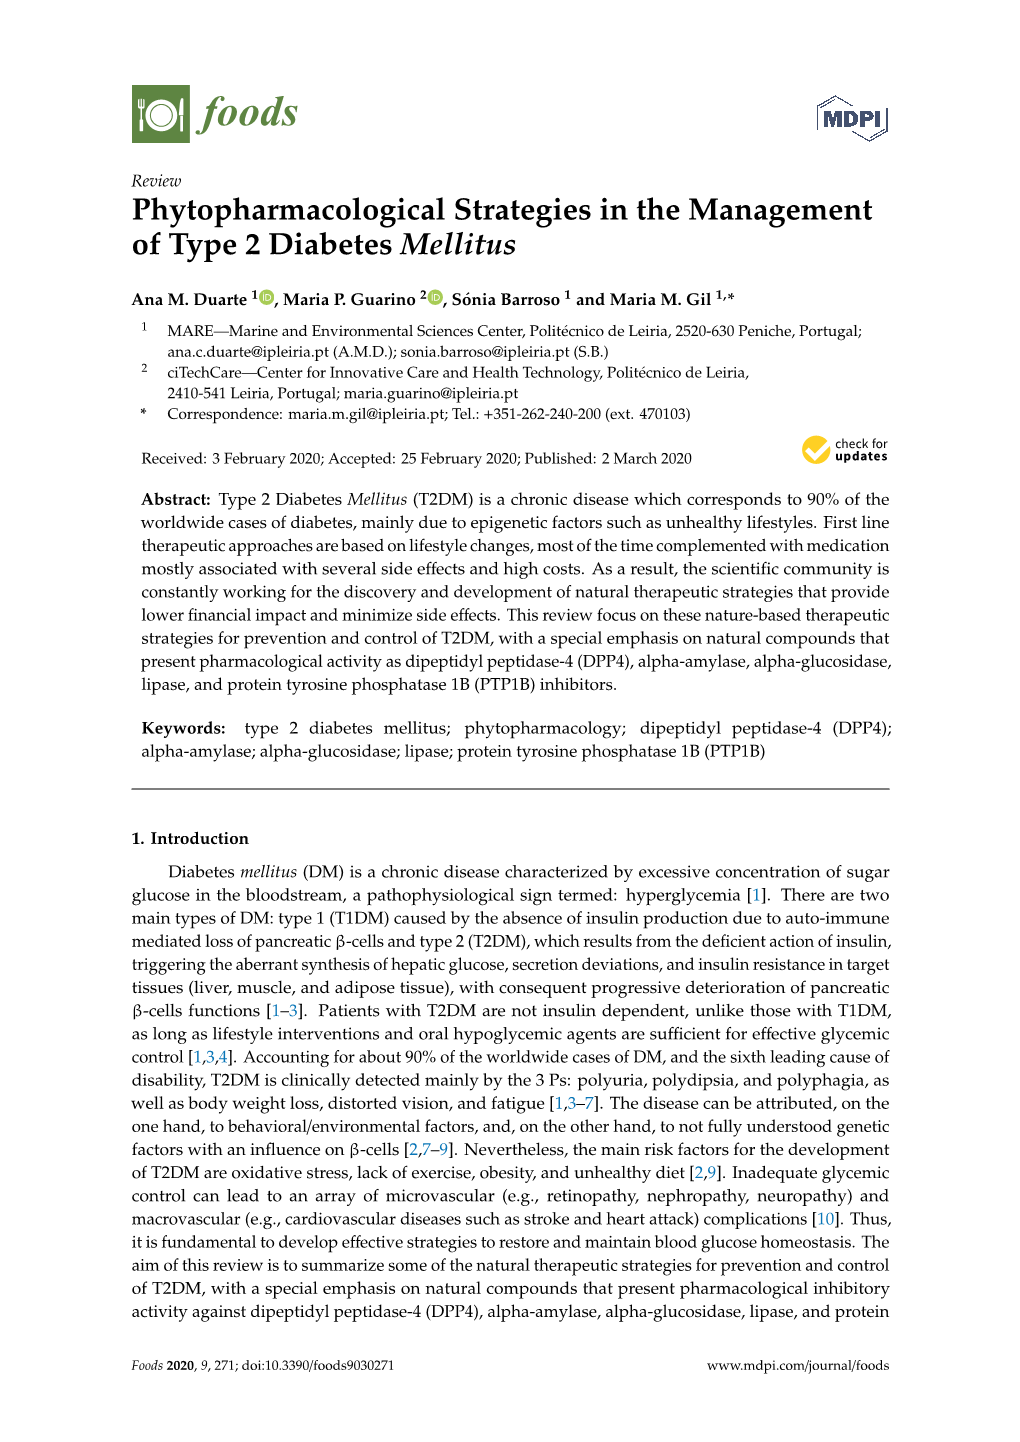 Phytopharmacological Strategies in the Management of Type 2 Diabetes Mellitus